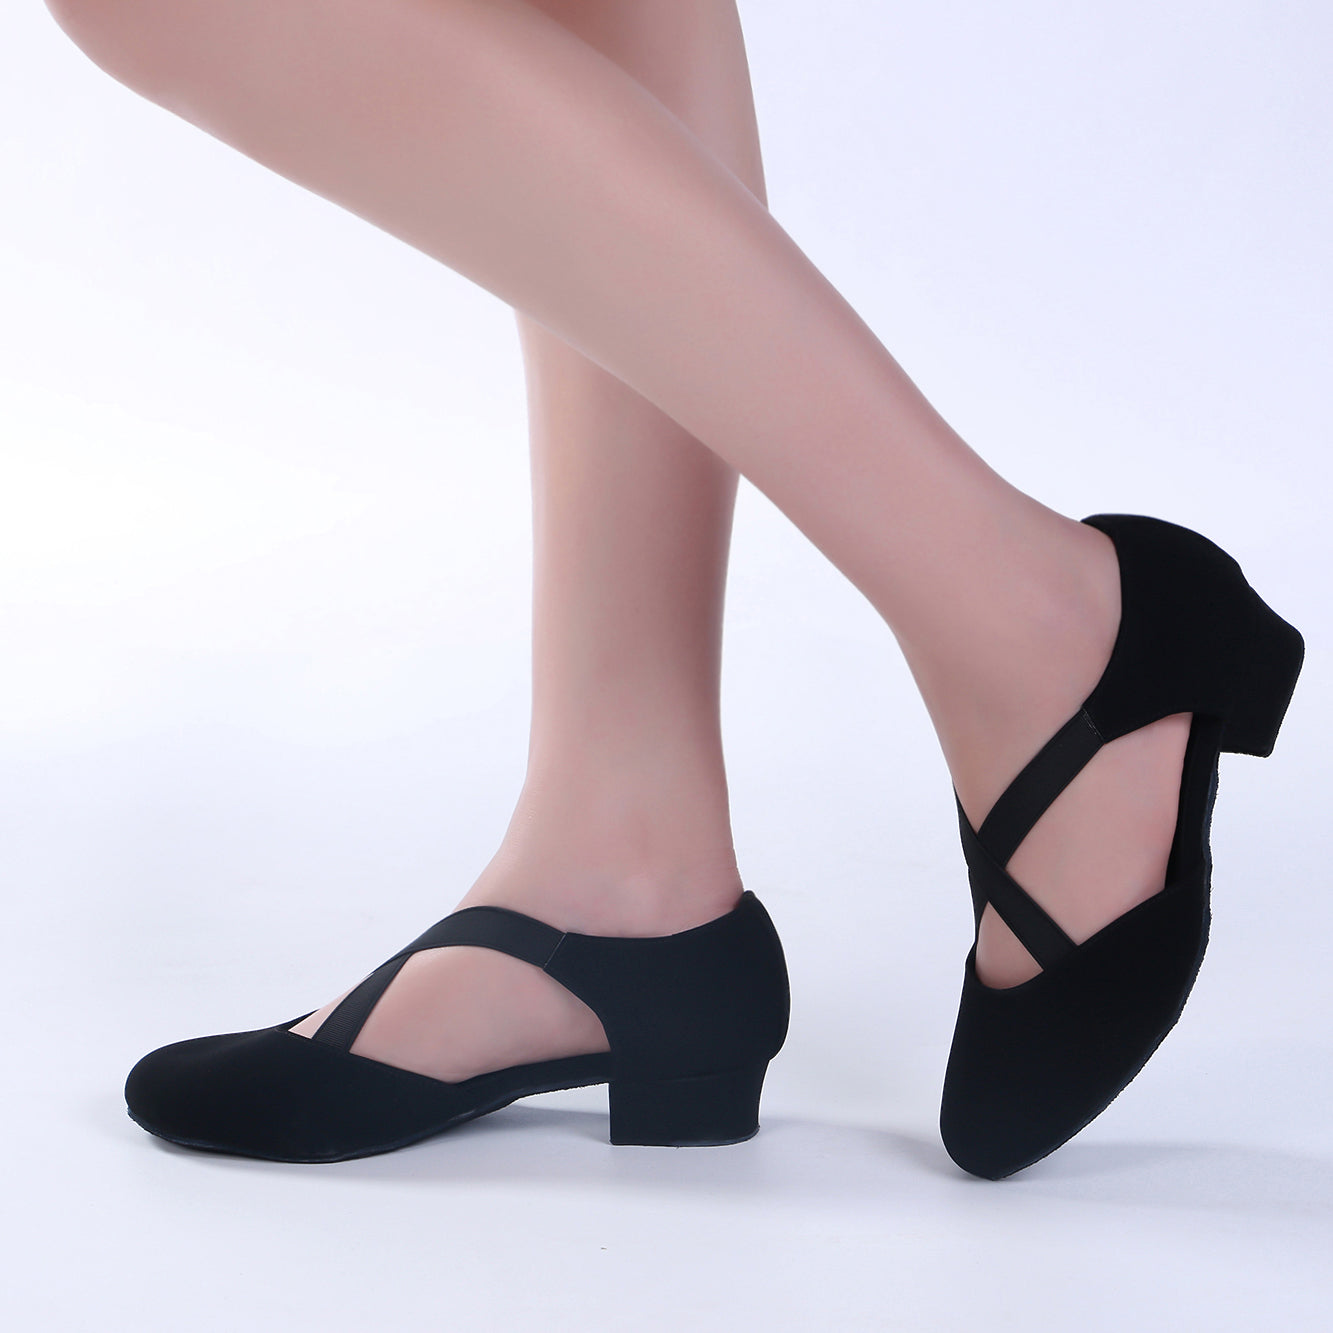 Ladies black low heel ballroom dancing shoes with suede sole for tango latin practice, closed-toe design (PD7307B)9